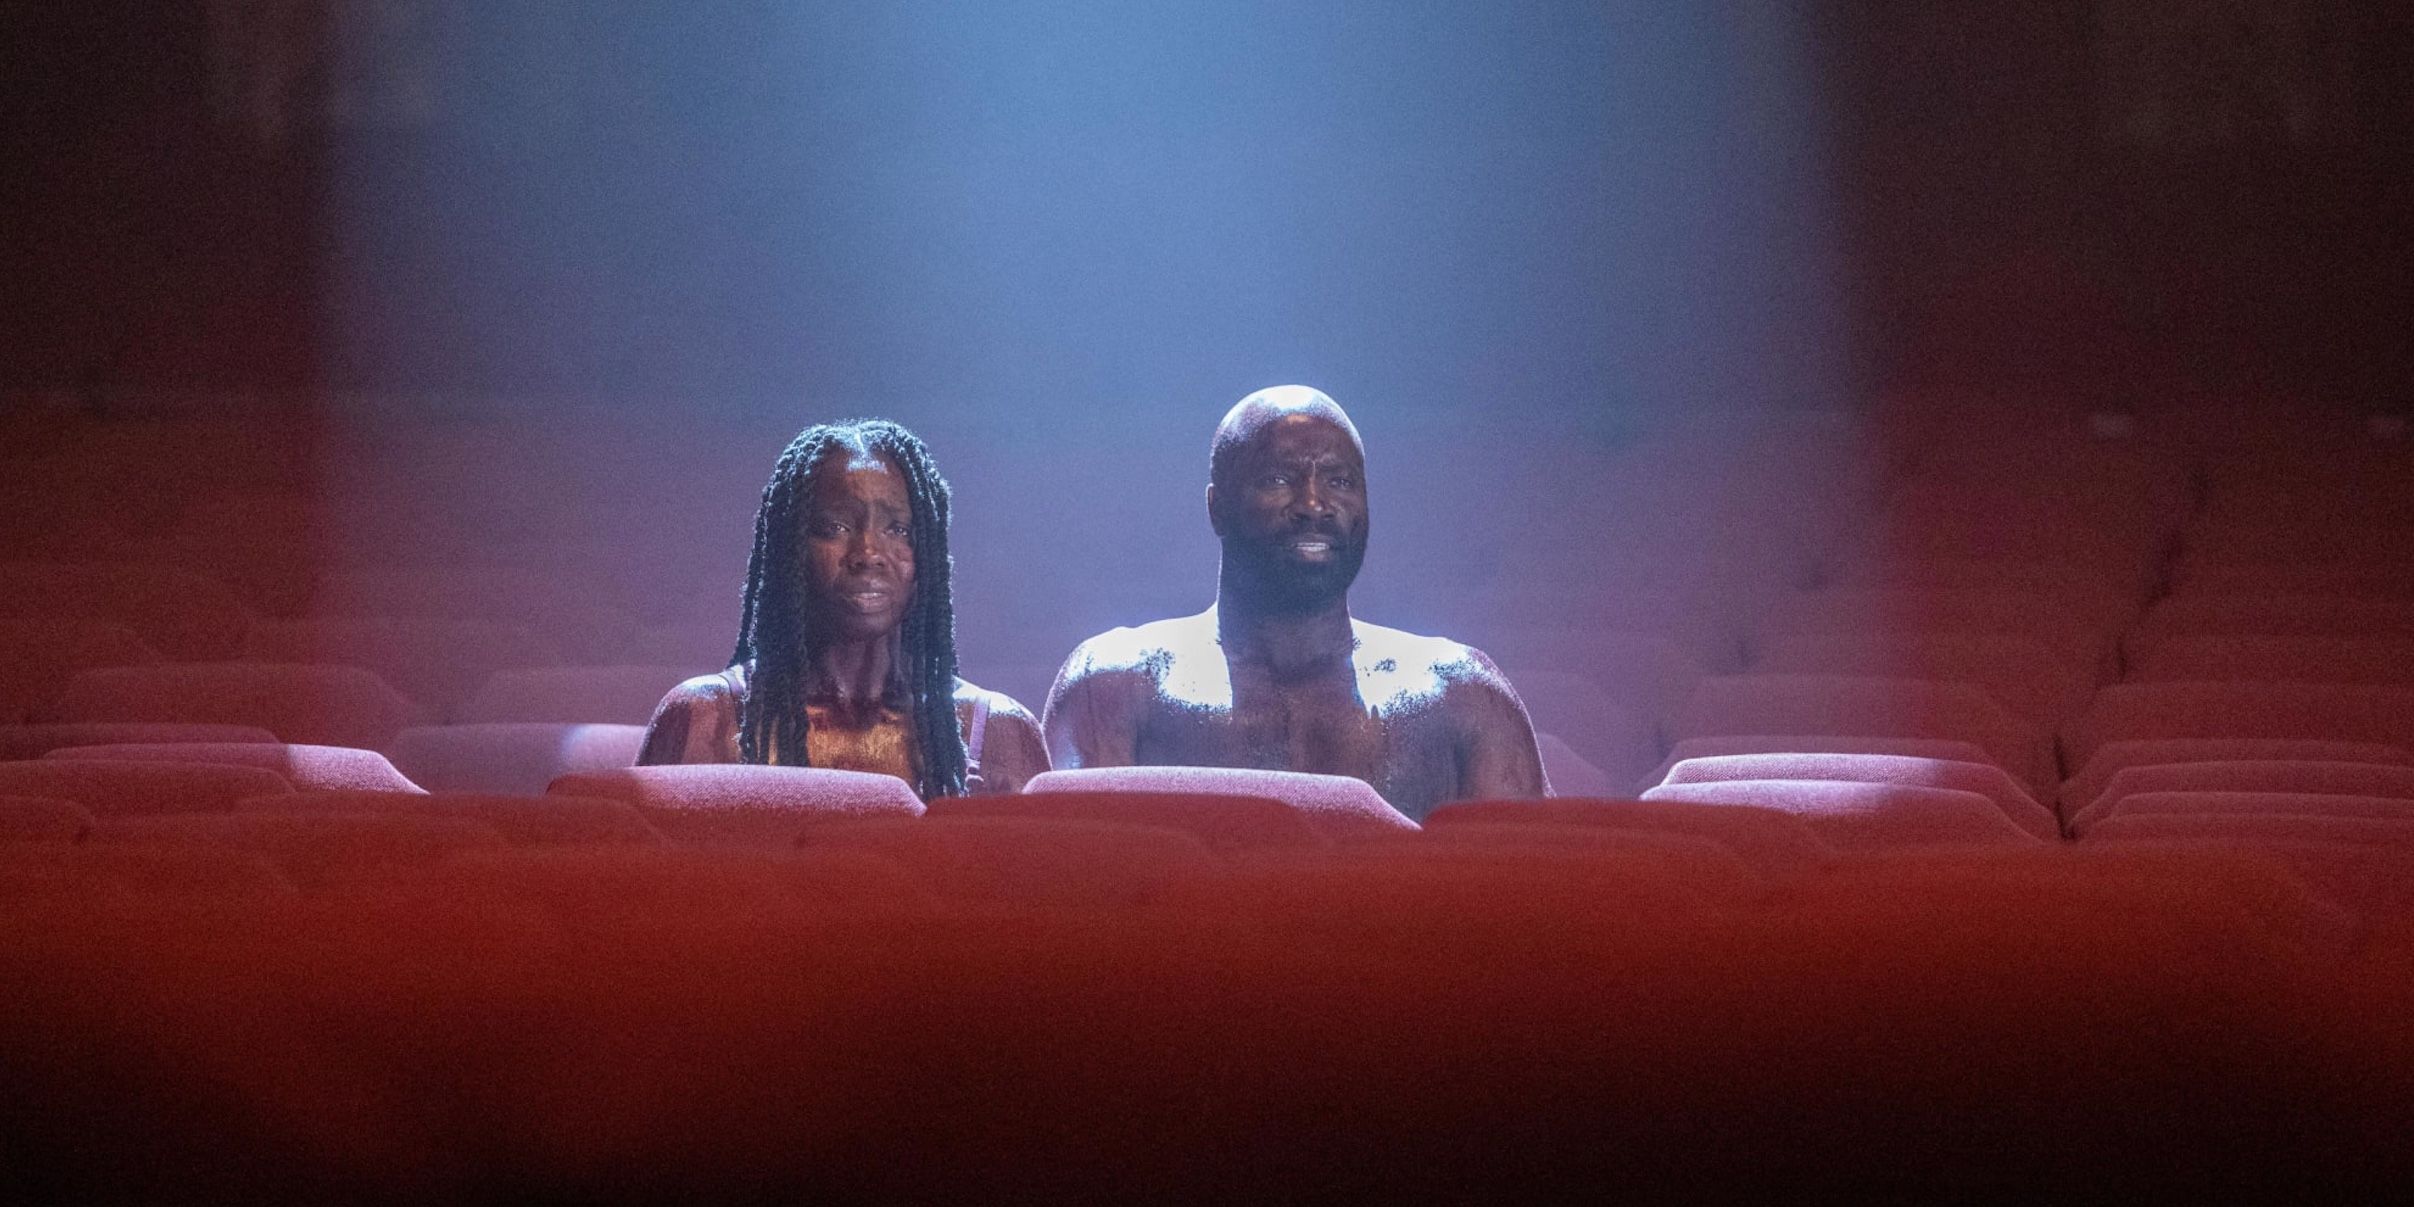 Adepero Oduye and Mike Colter in Monsterland Season 1 on Hulu